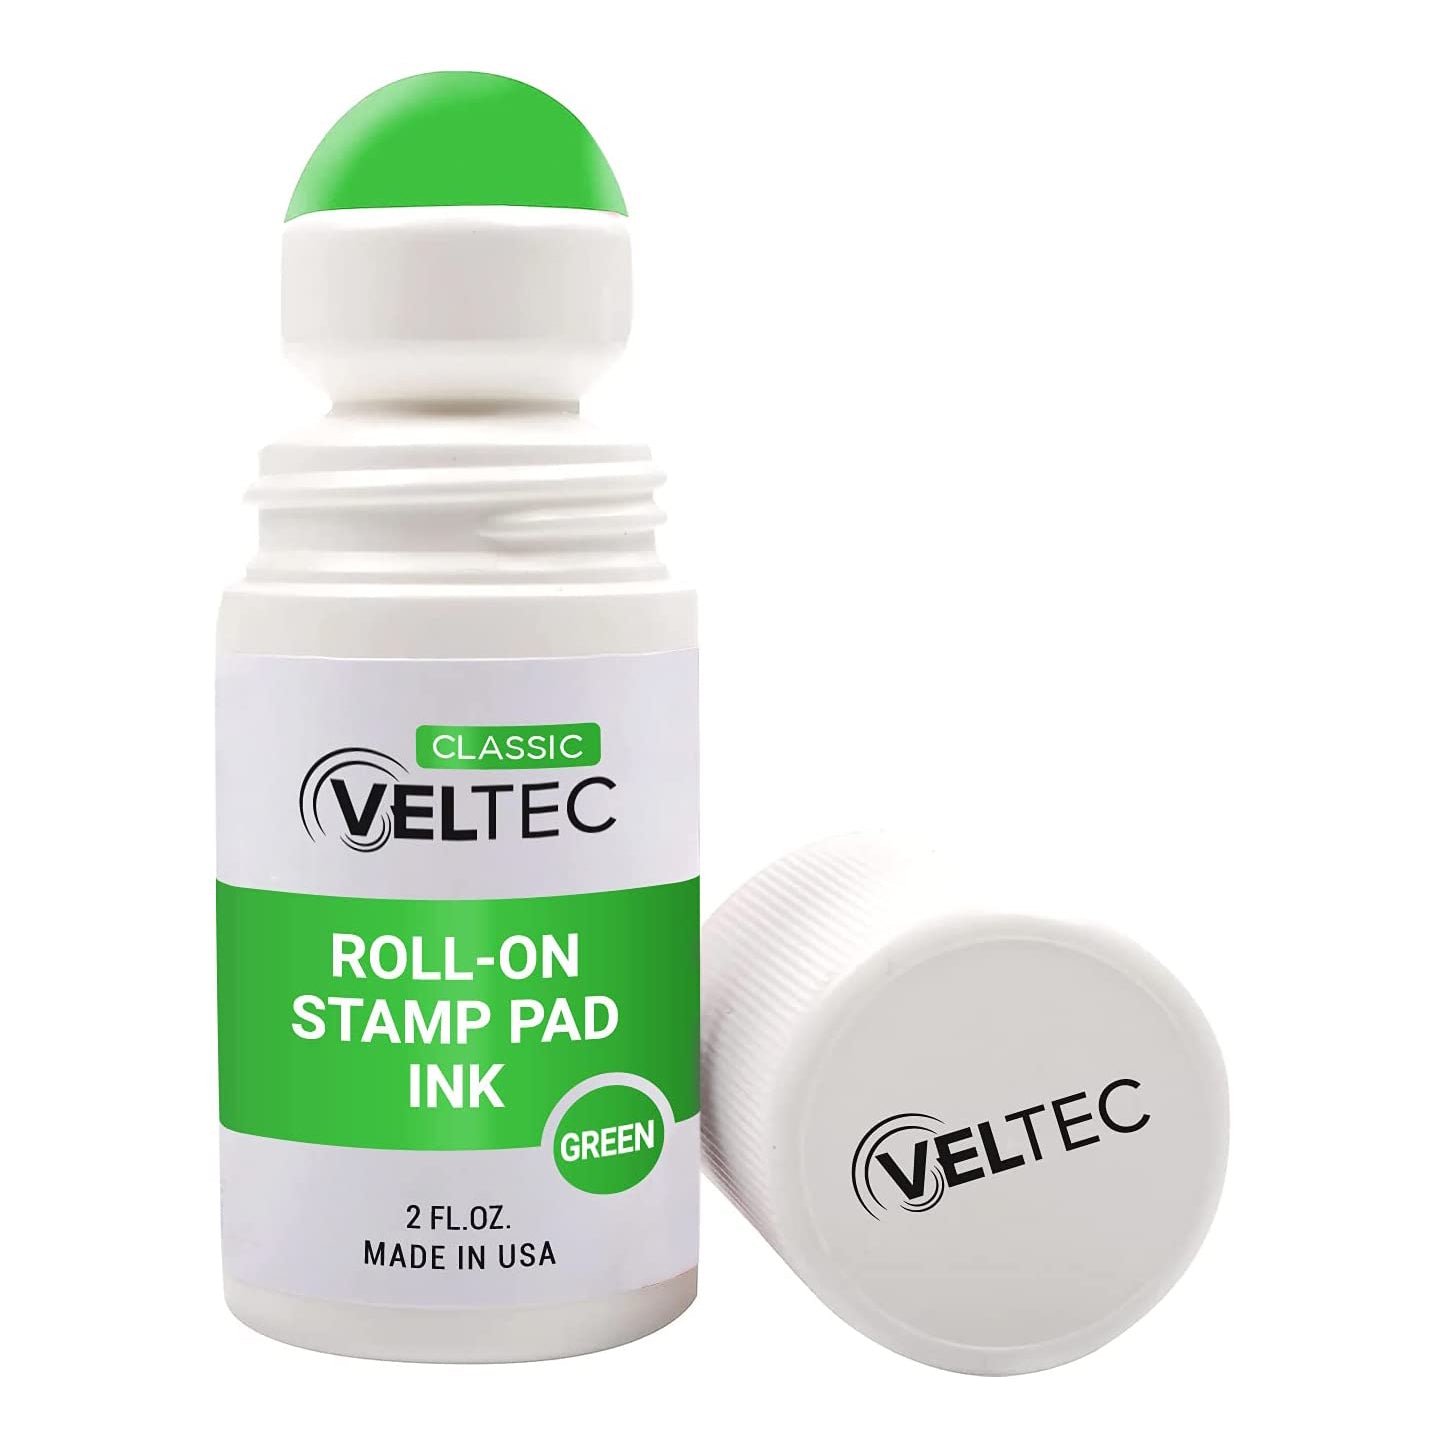 Veltec Premium Refill Ink for use with Self Inking Stamps, Daters